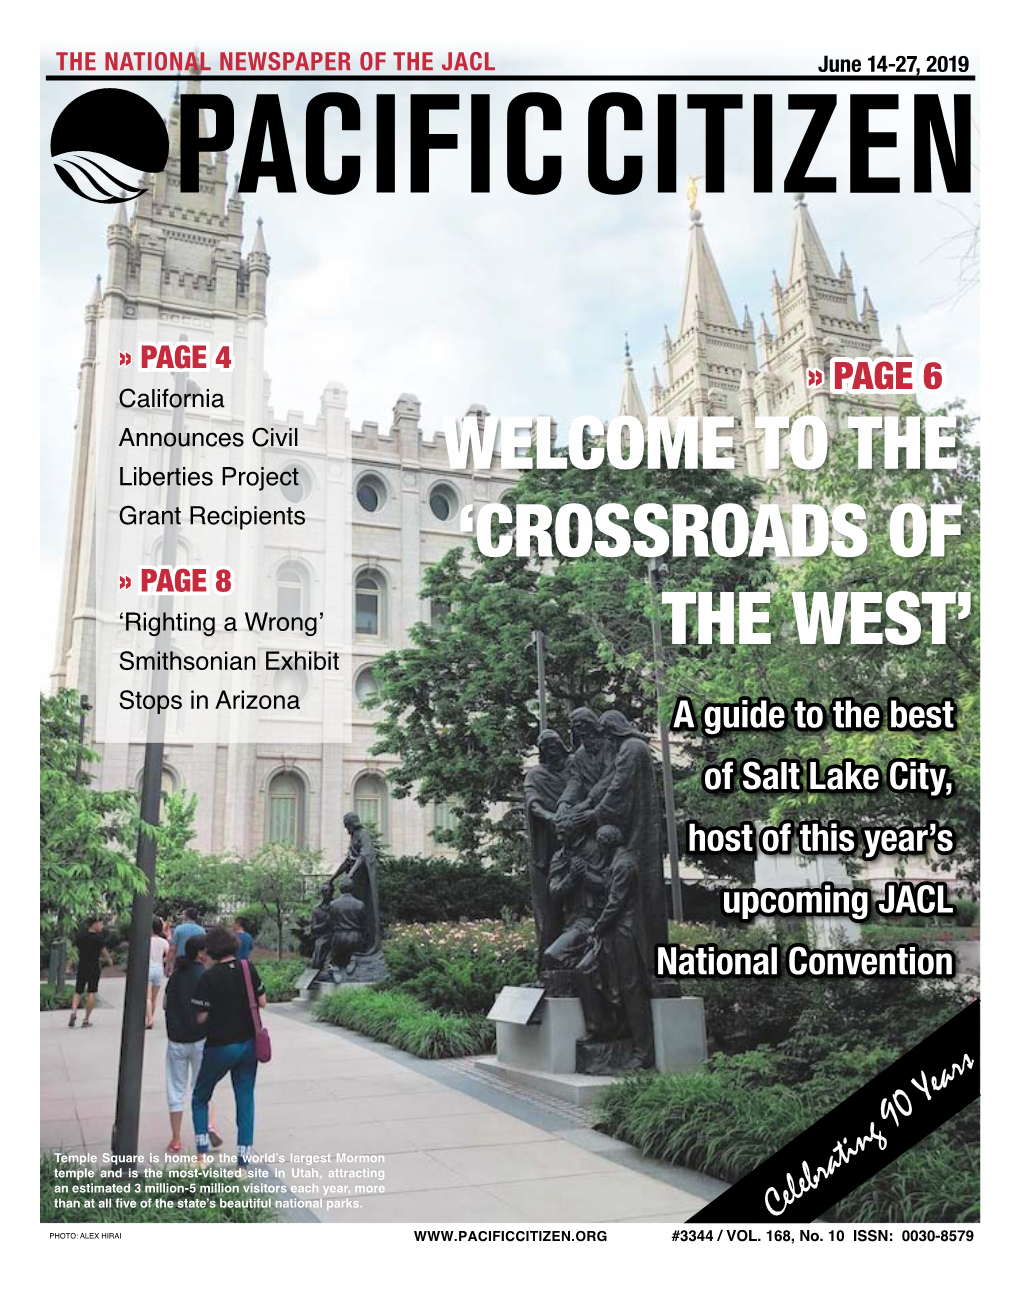 THE NATIONAL NEWSPAPER of the JACL June 14-27, 2019